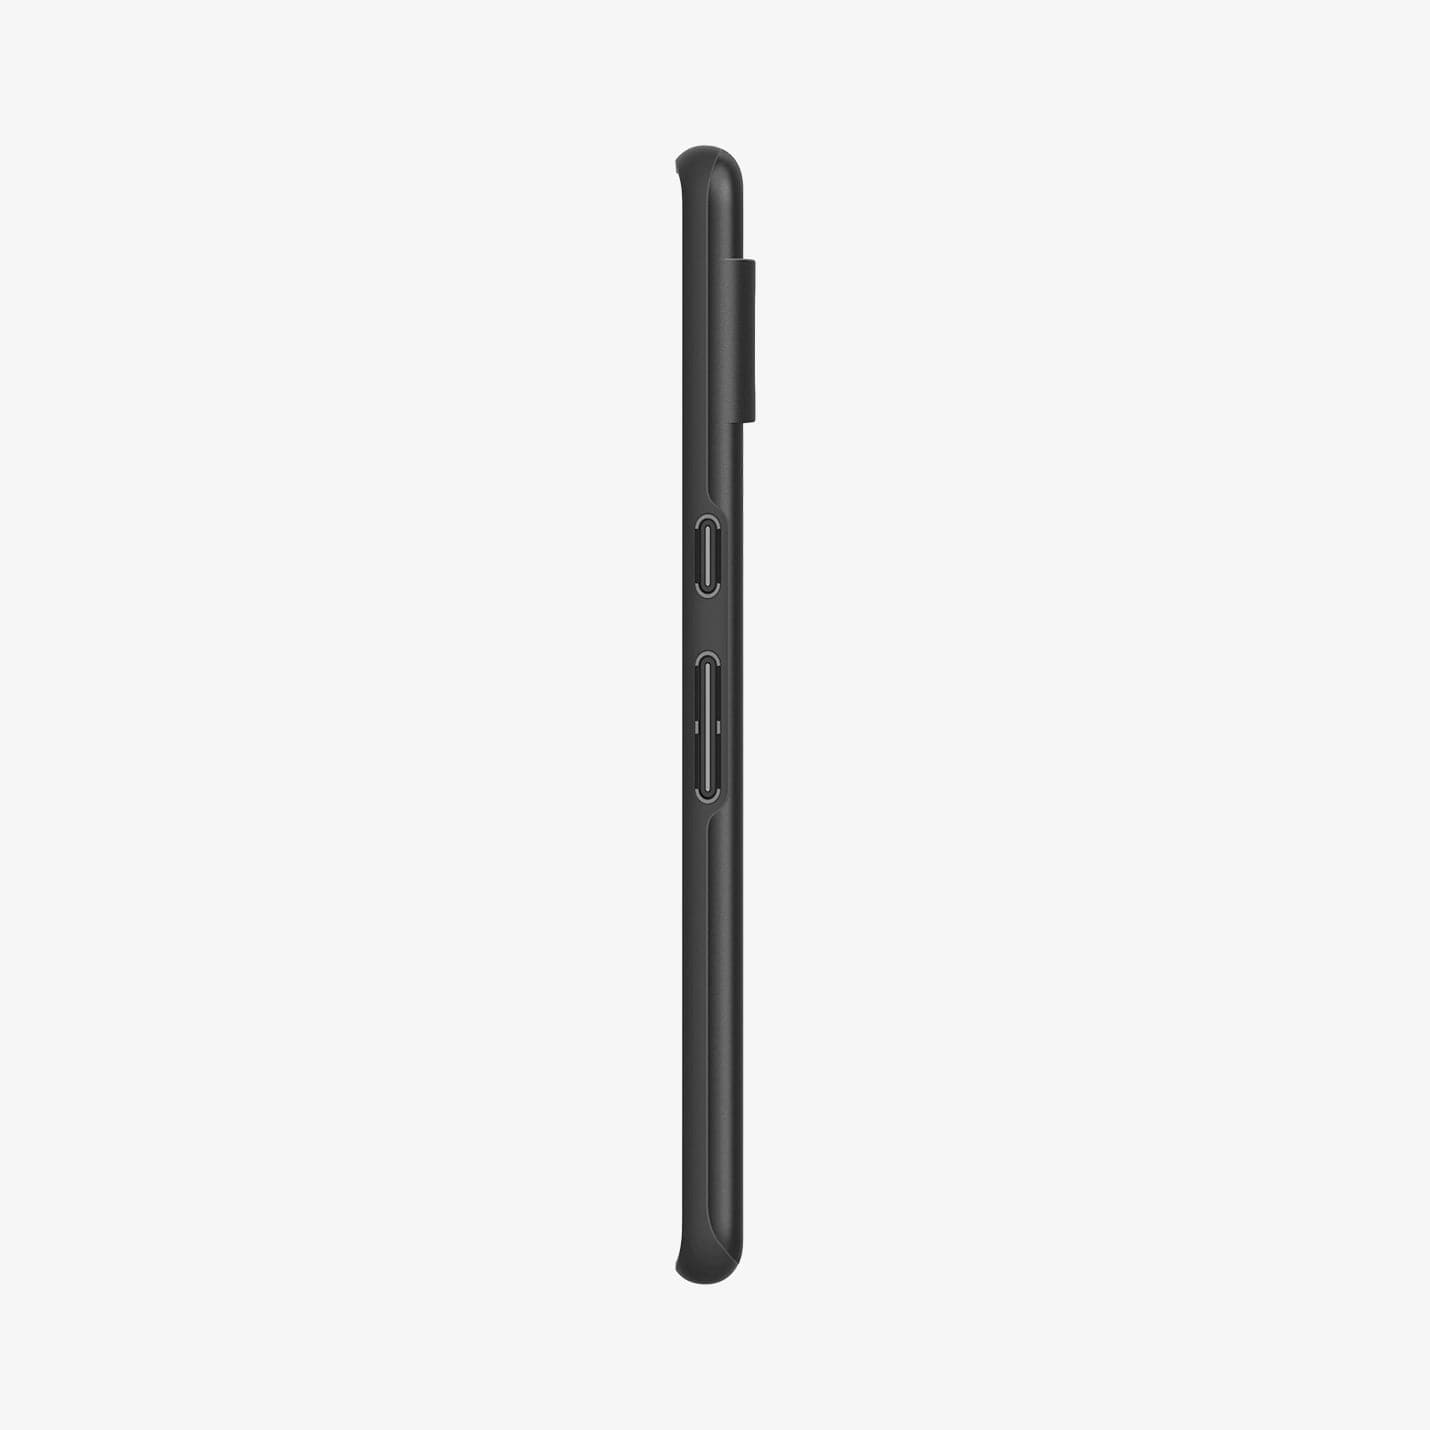 ACS04733 - Pixel 7 Pro Case Thin Fit in black showing the side with volume controls